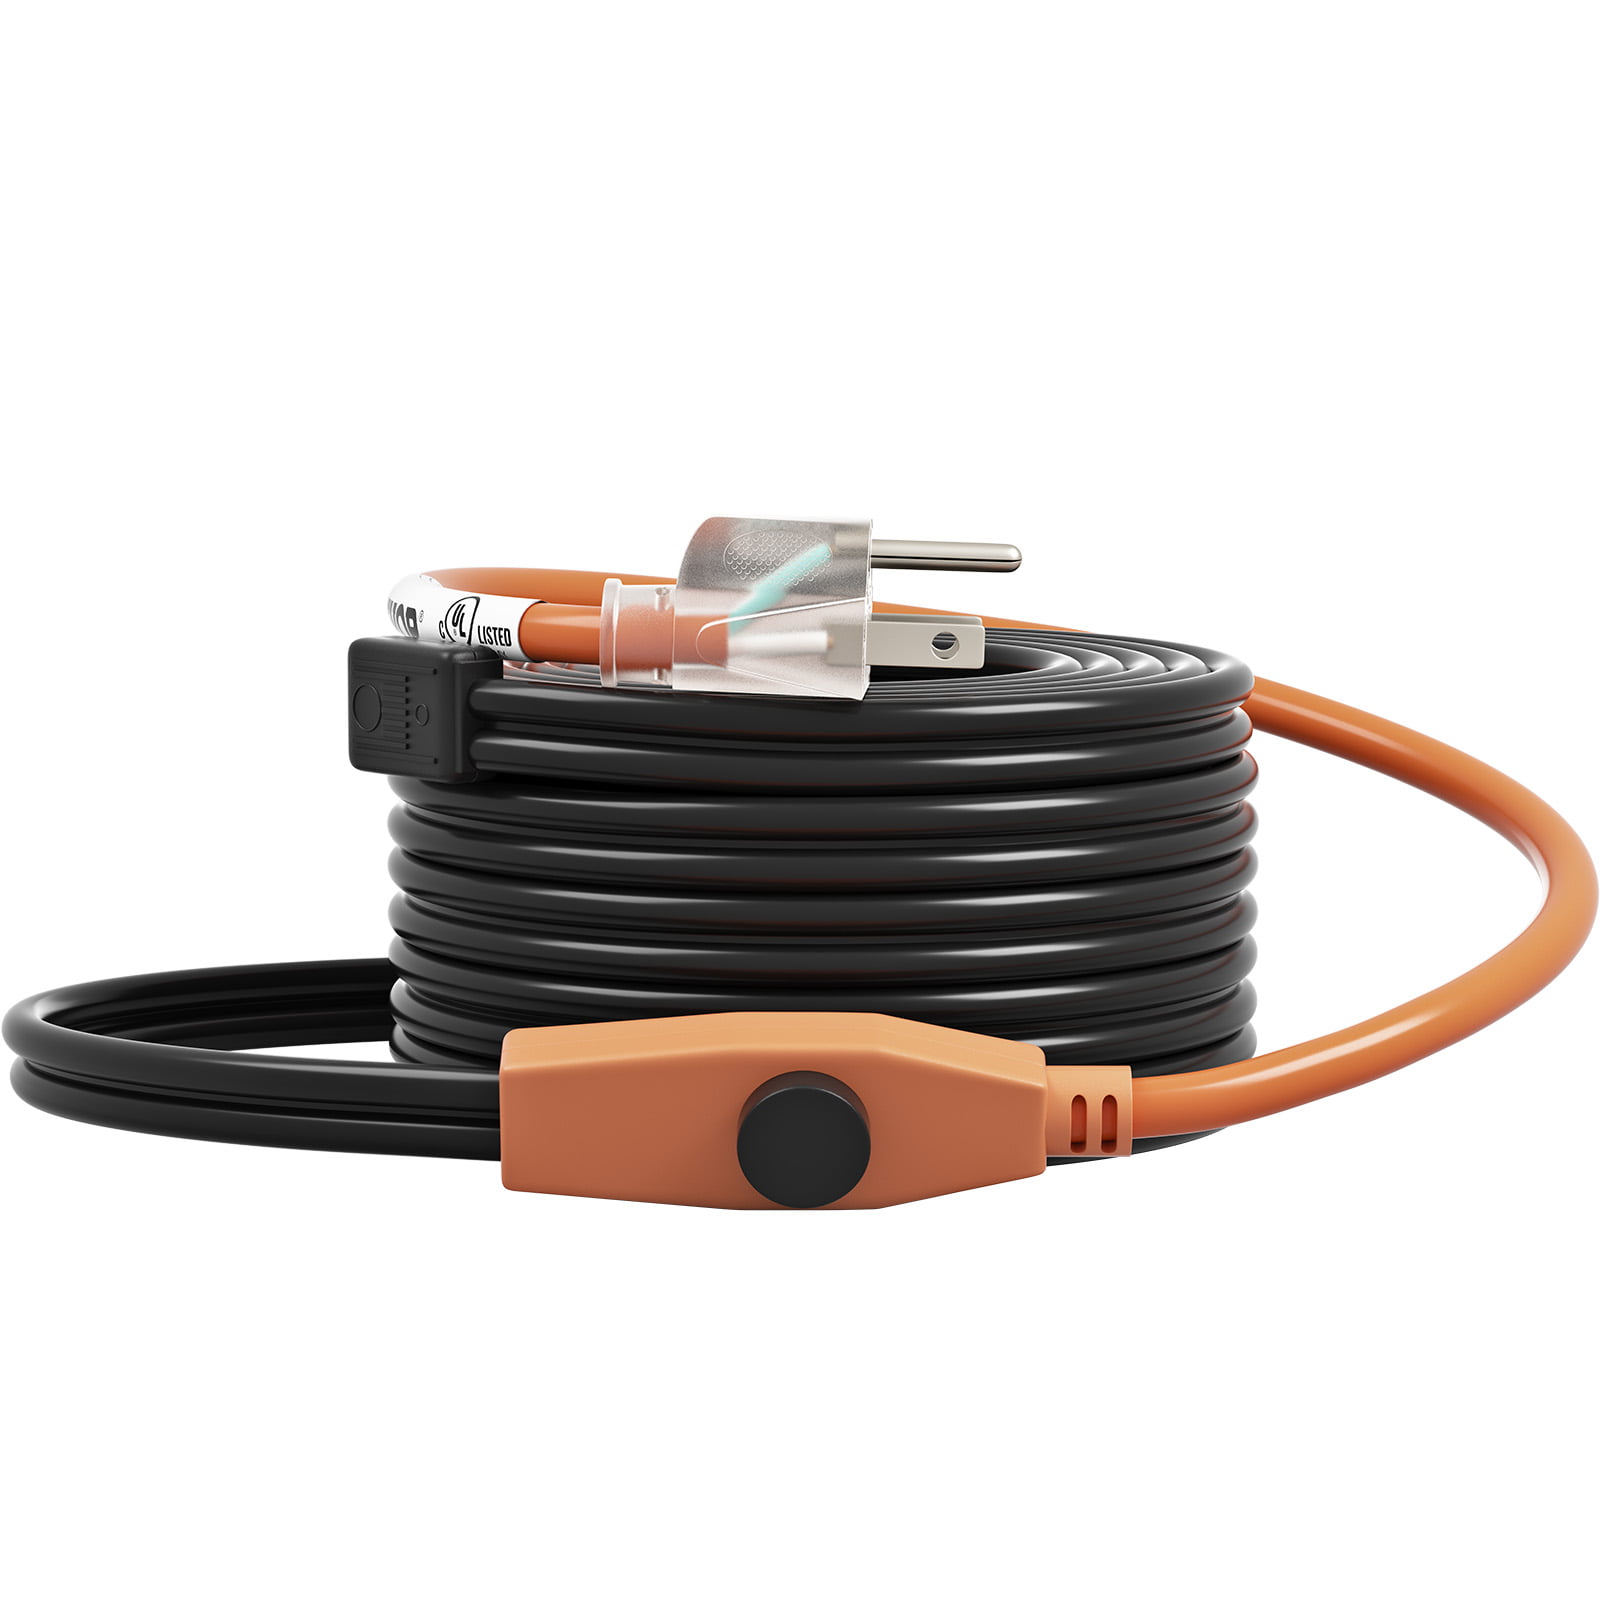 Pipe Ing Cable, 12-feet 25w Tape For Pipes With Built-in Tat, Protects Pipe  From Zing, 120v Us Plug